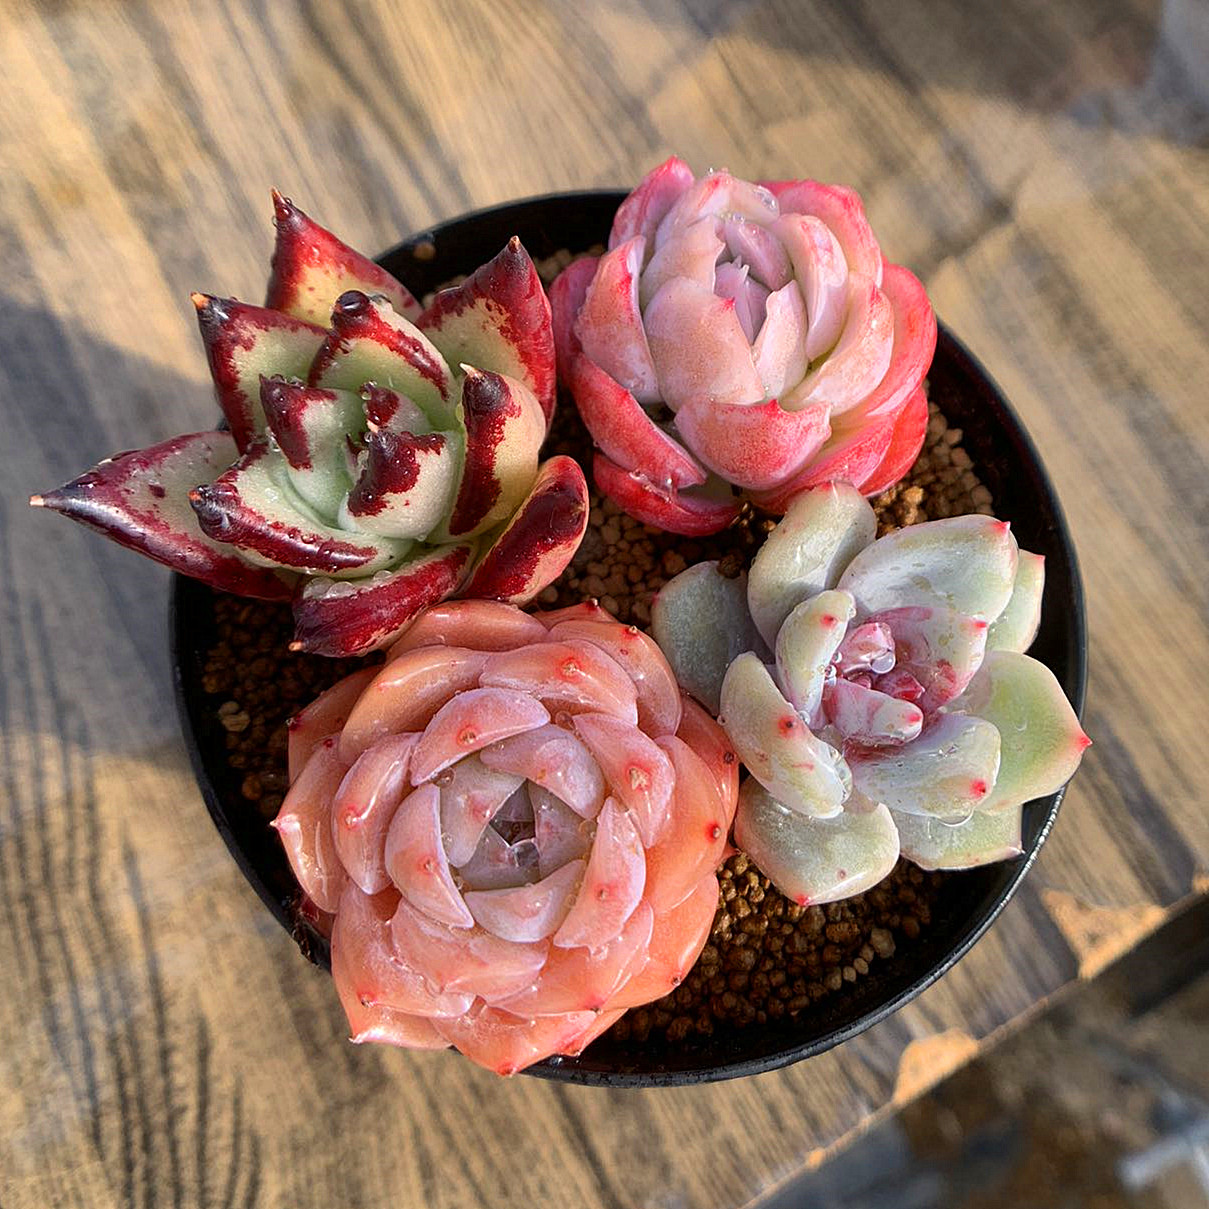  click post free shipping .... trial set plus beginner oriented DIY original earth, Mini spade entering ekebe rear . Point .. succulent plant many meat speciality verve